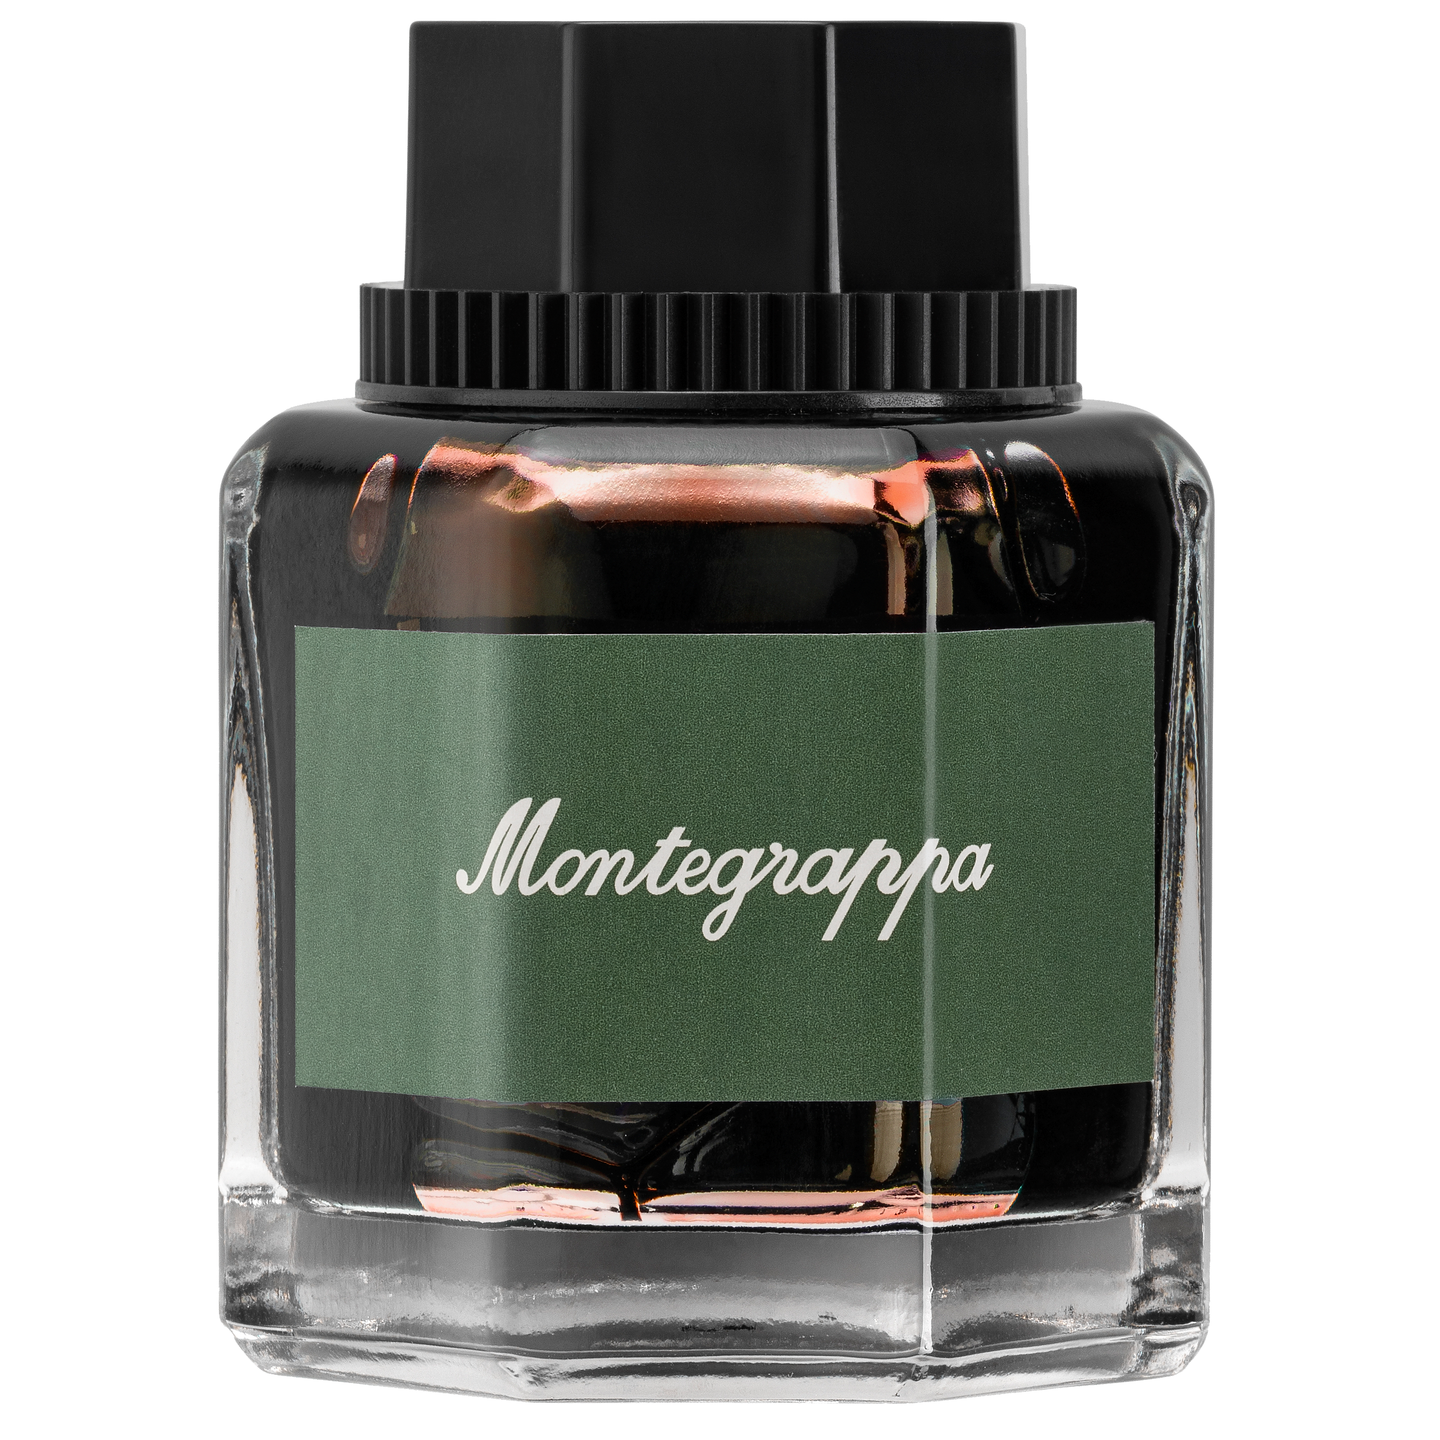 Montegrappa Tinte Flame 50ml - Green packaging